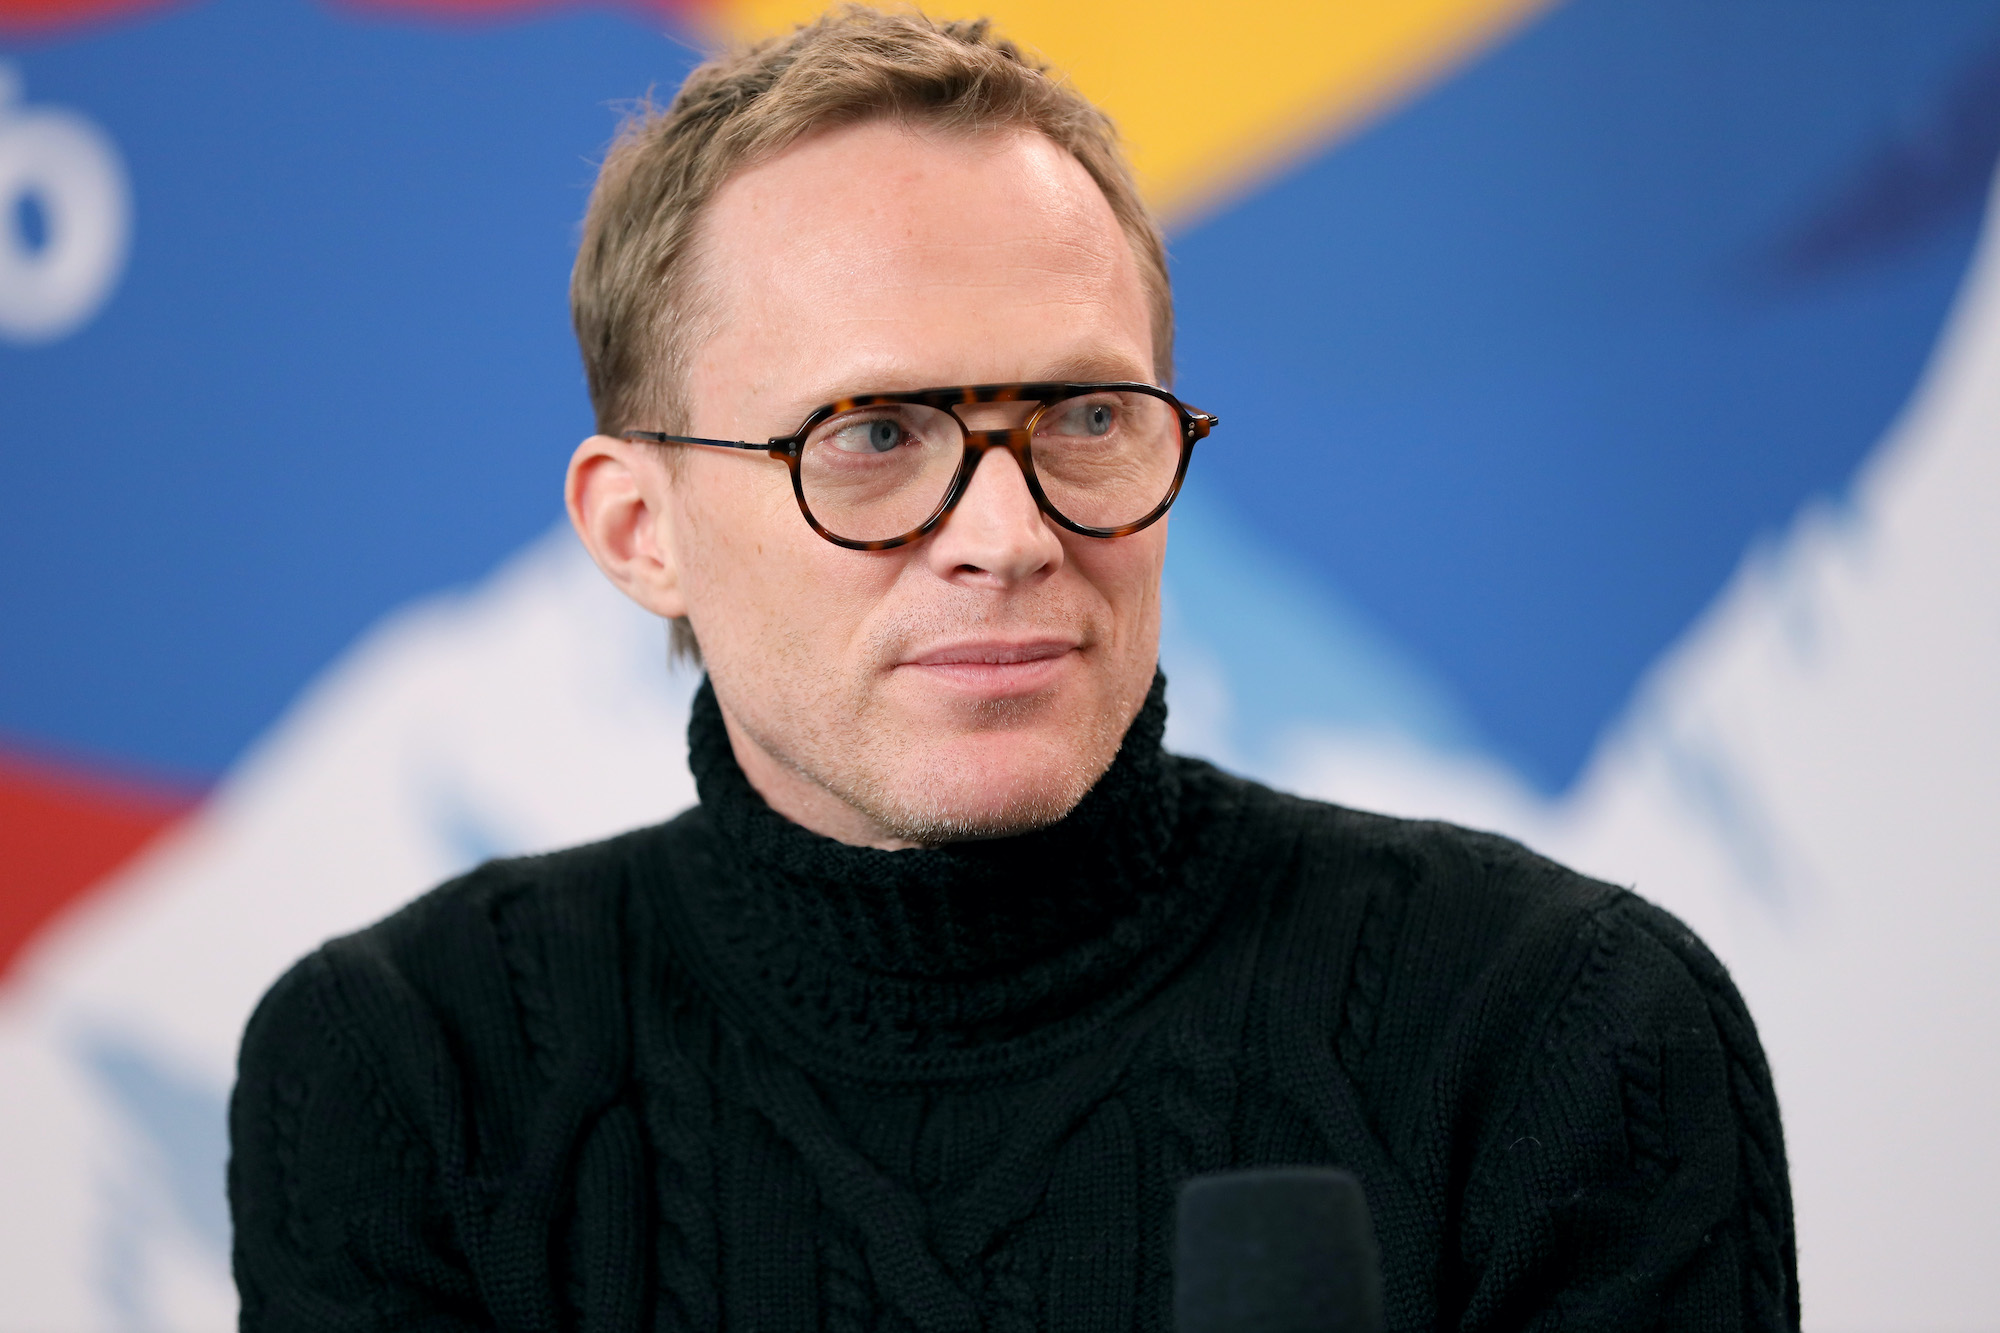 celebrities better with age - Paul Bettany